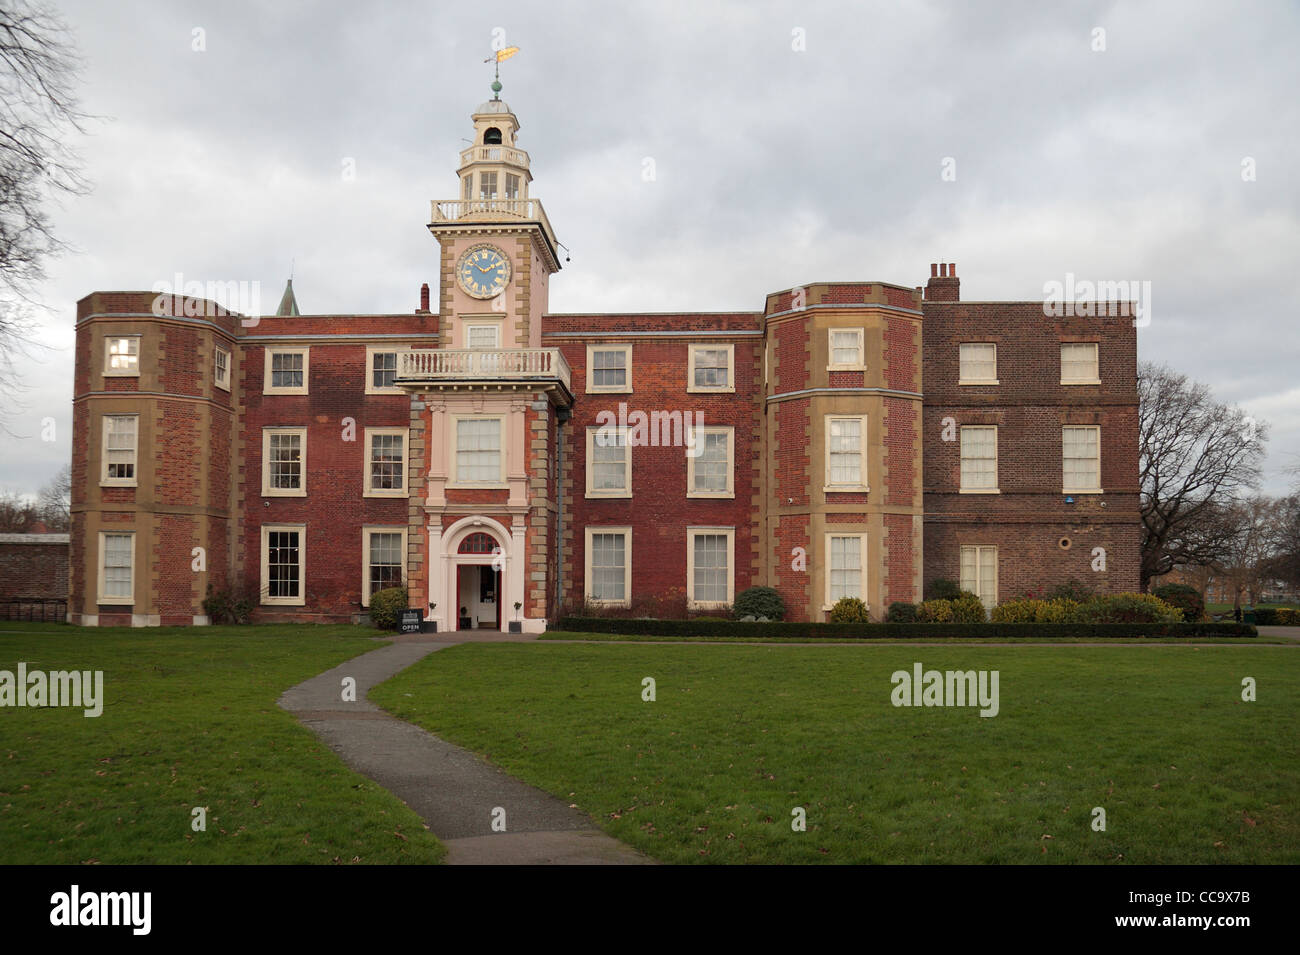 Bruce Castle, home of the Bruce Castle Museum, is a 16th Century Manor House in Tottenham, North London, UK. Stock Photo